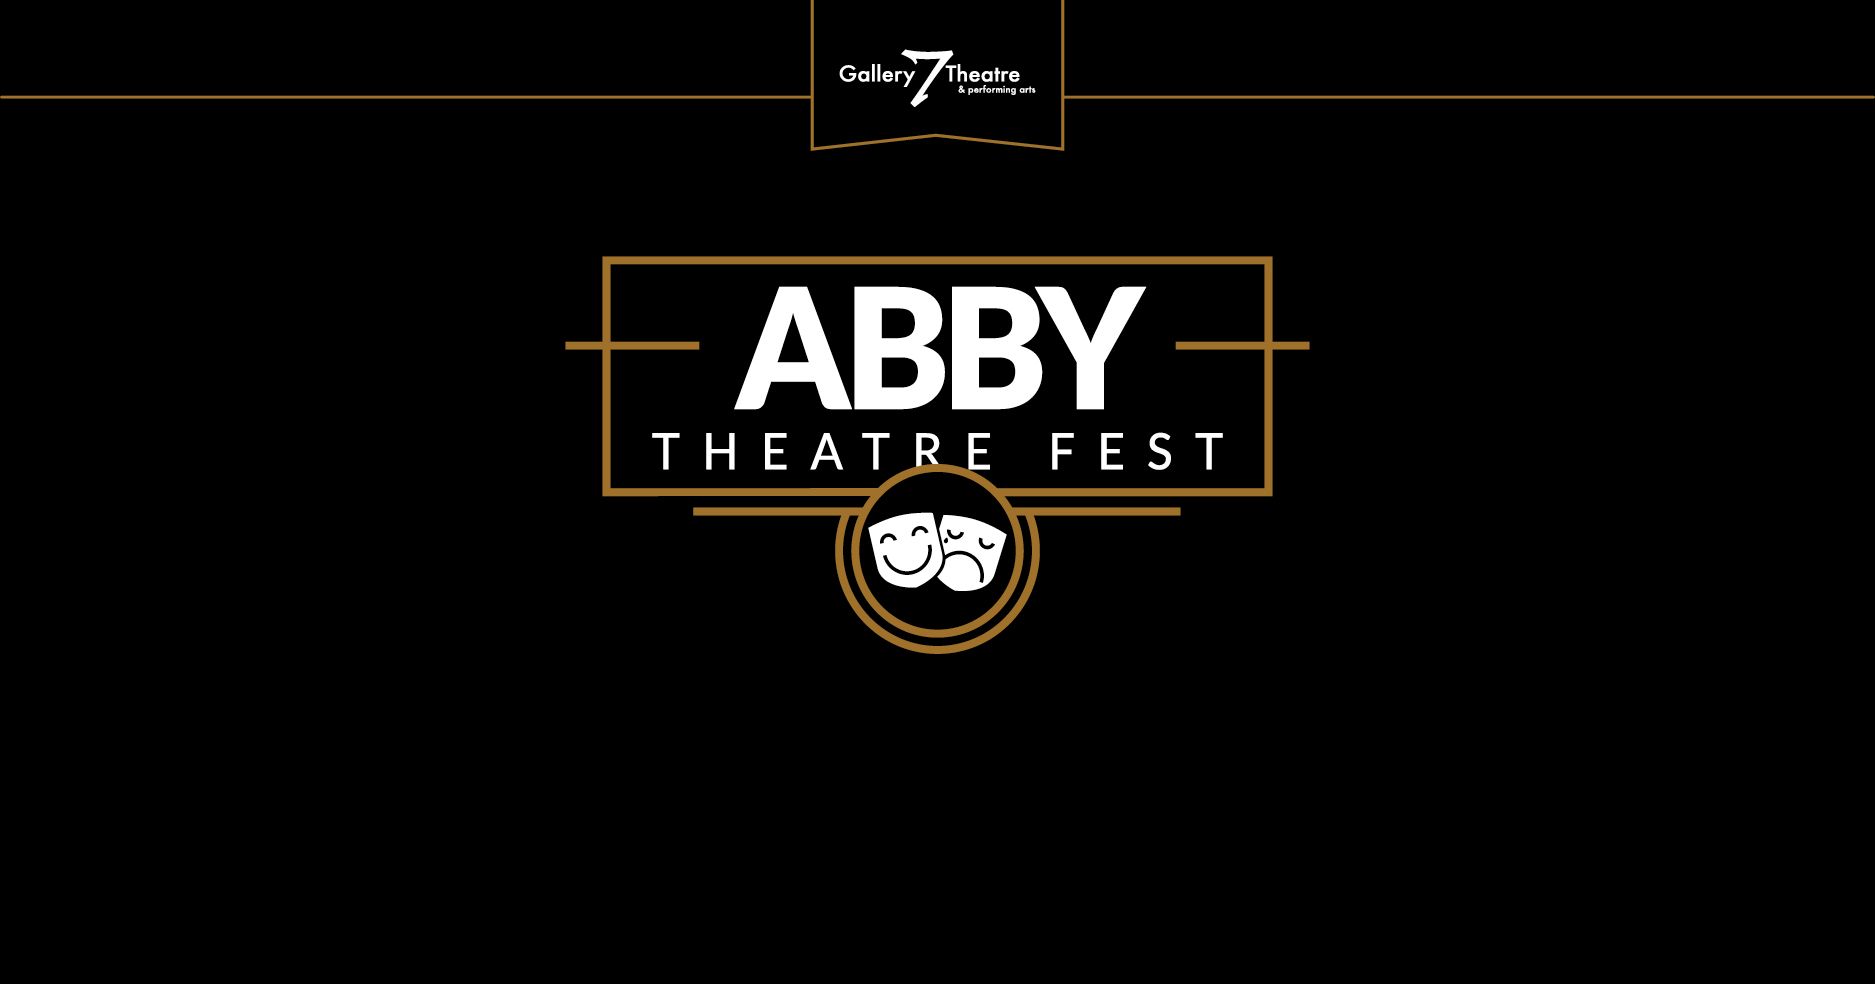 Gallery 7 Theatre Opens “Ordinary Heroes” Theatre Season with Abby Theatre Fest